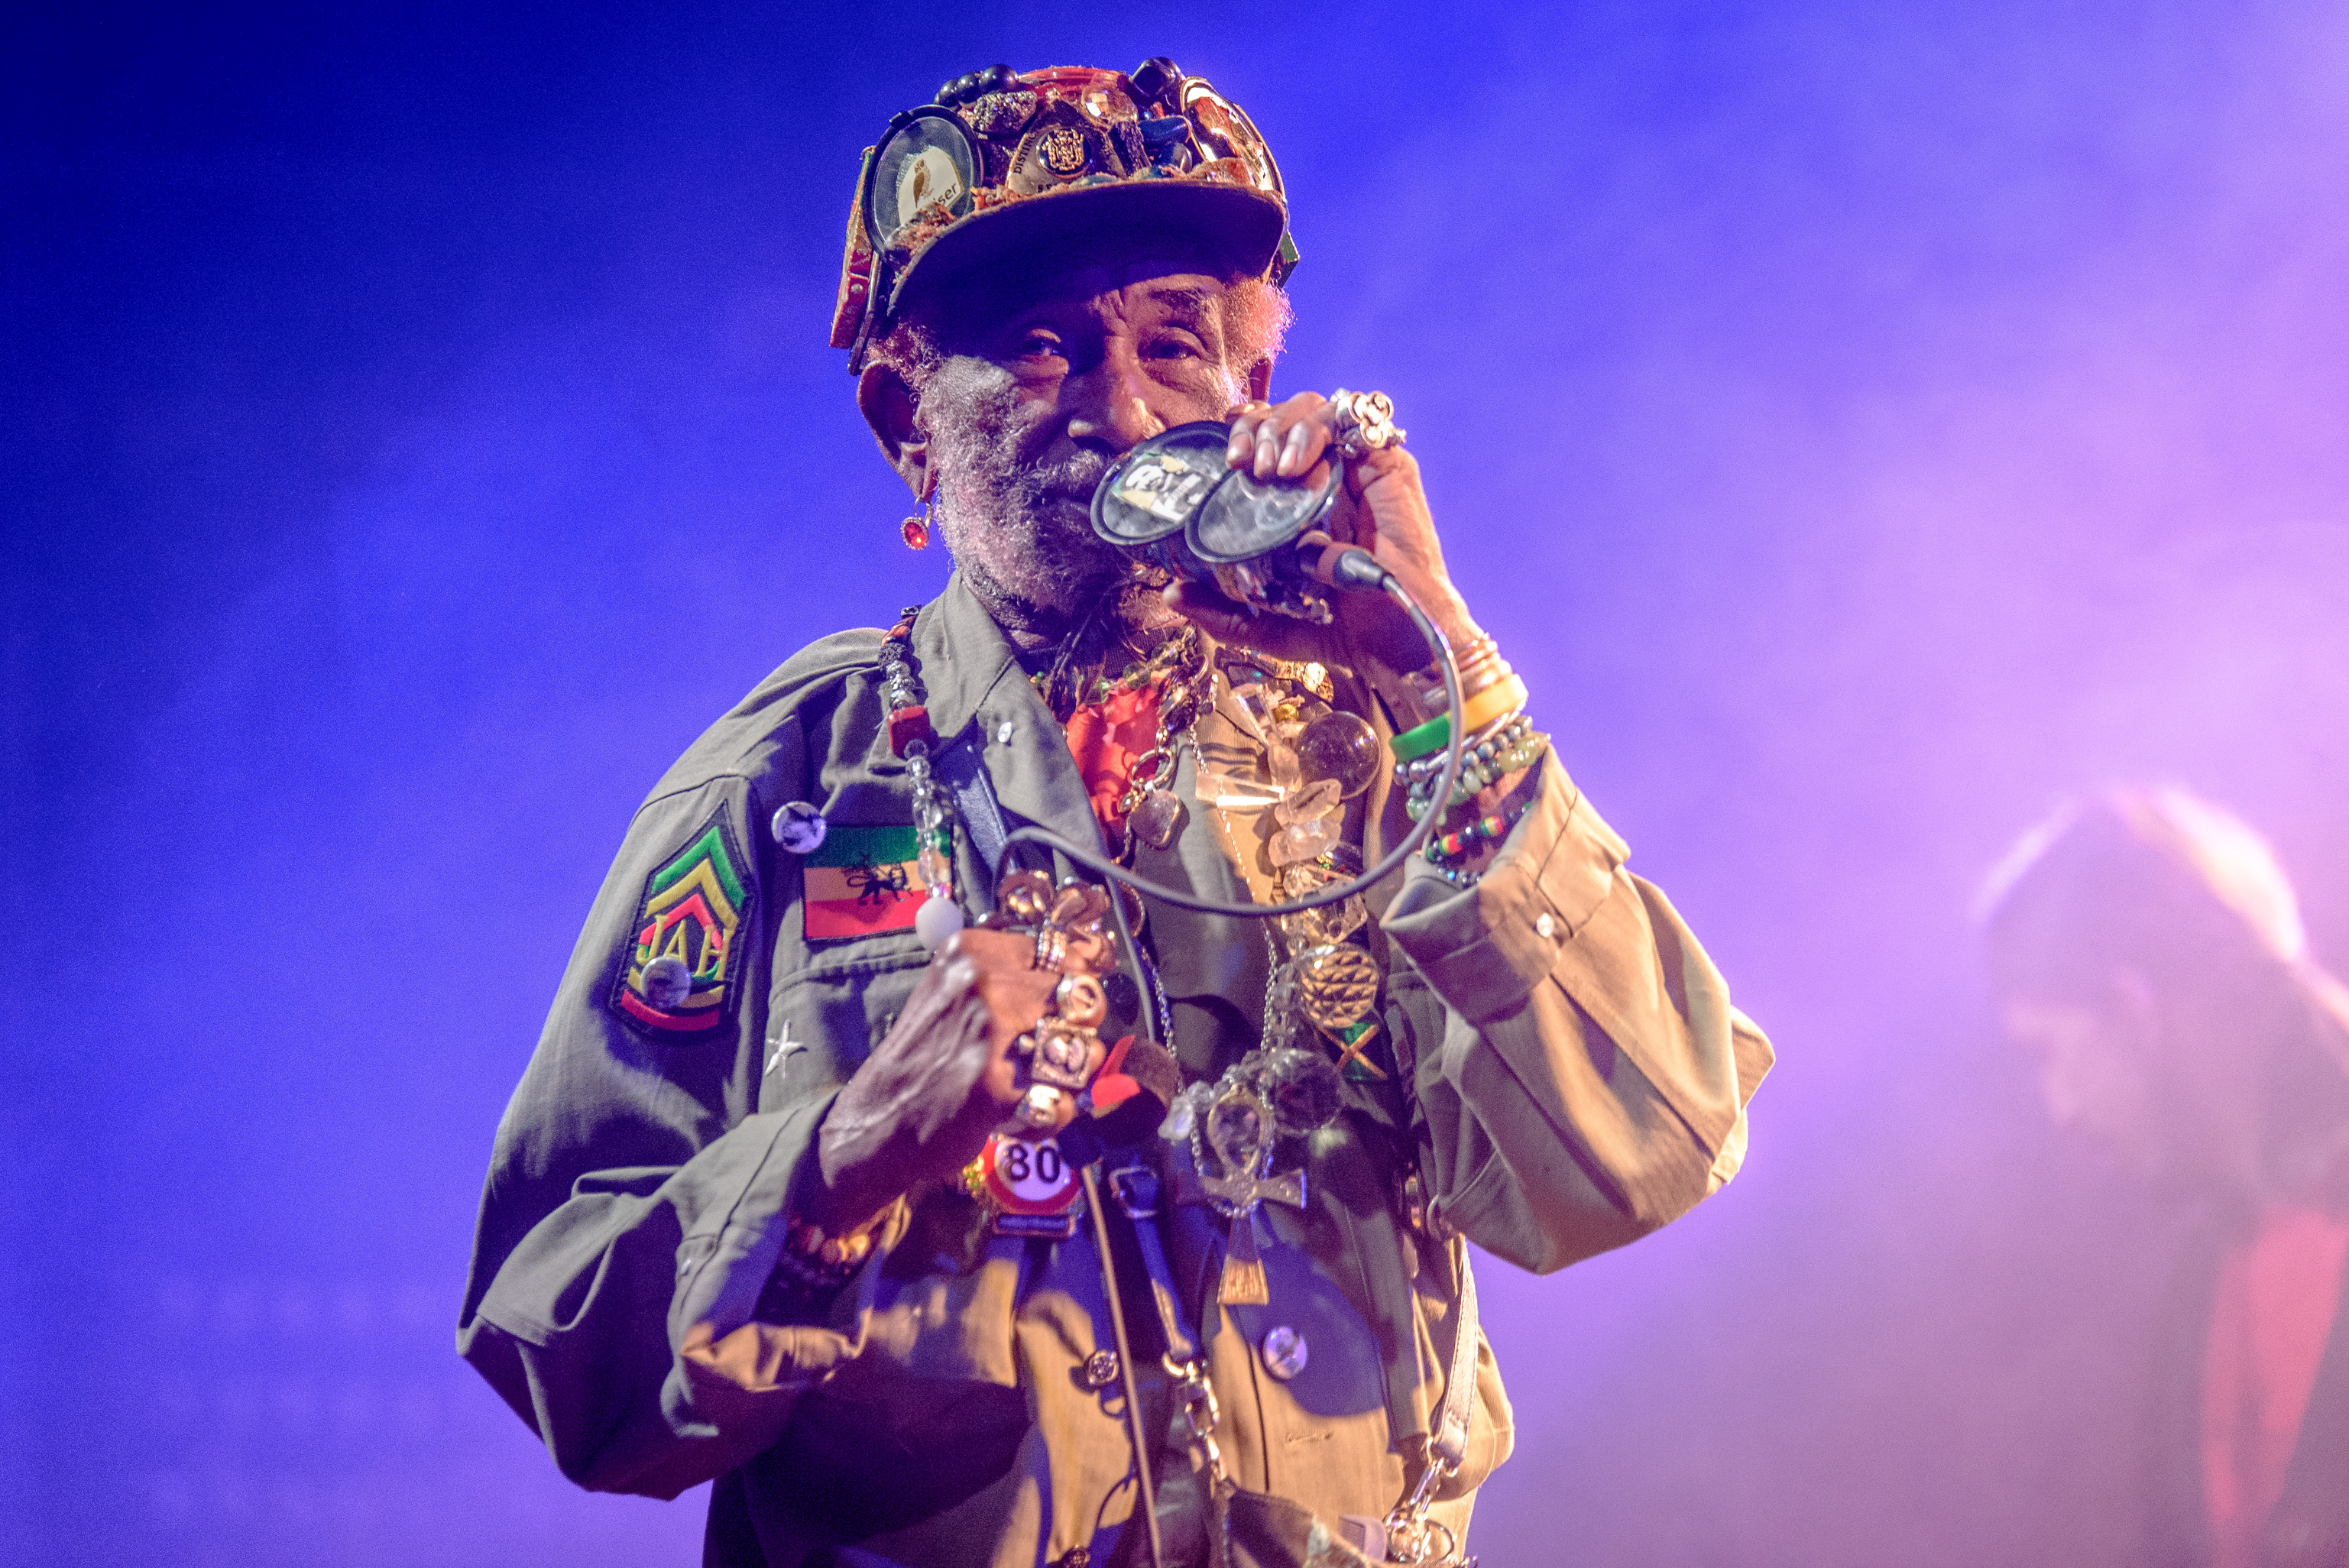 Lee Scratch Perry Live